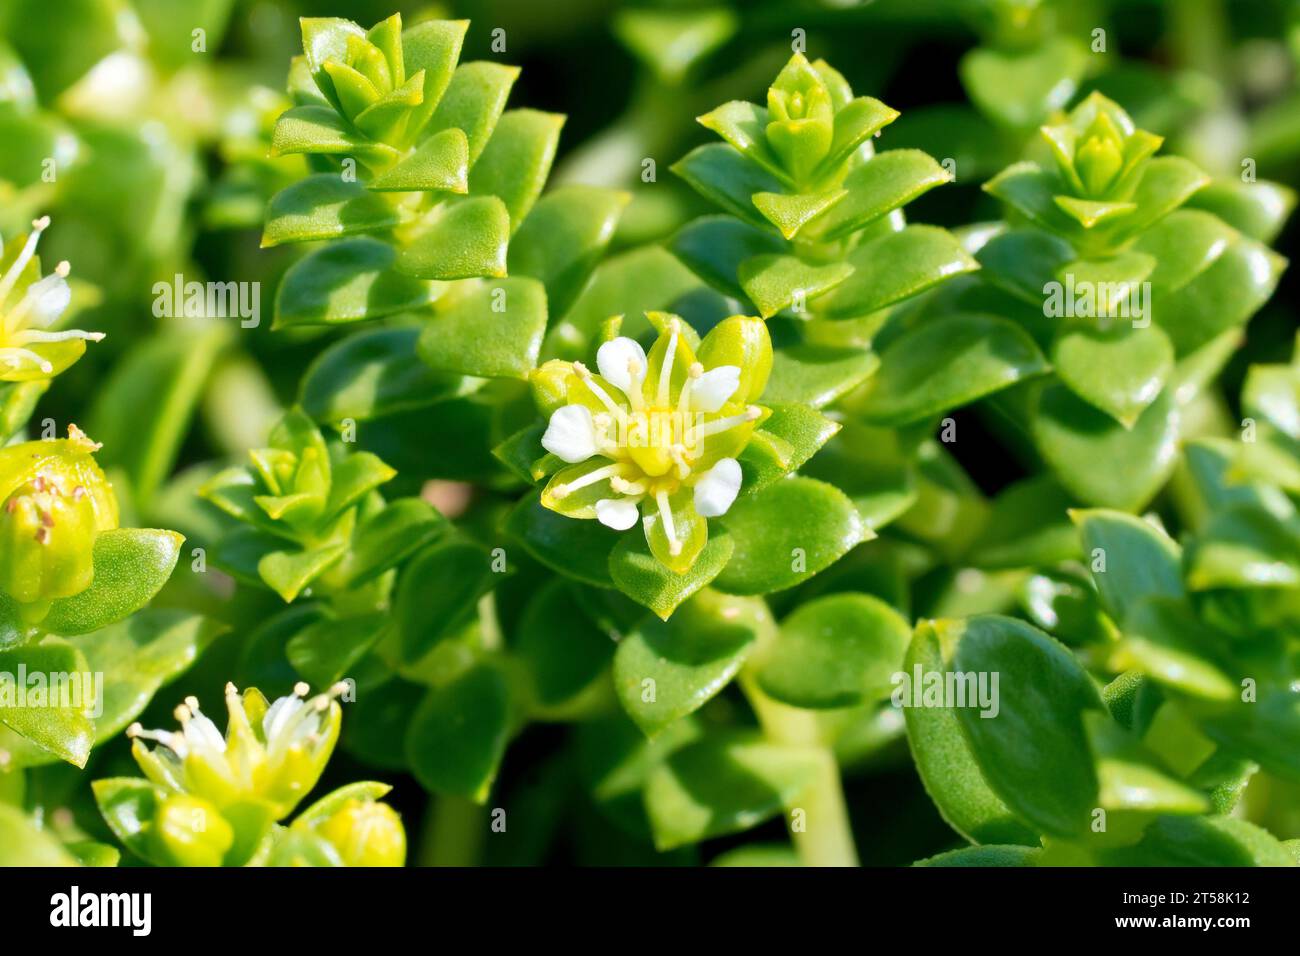 Sea Sandwort (honckenya peploides), close up showing the small white flower, stems and tightly packed leaves of this low-growing seaside succulent. Stock Photo